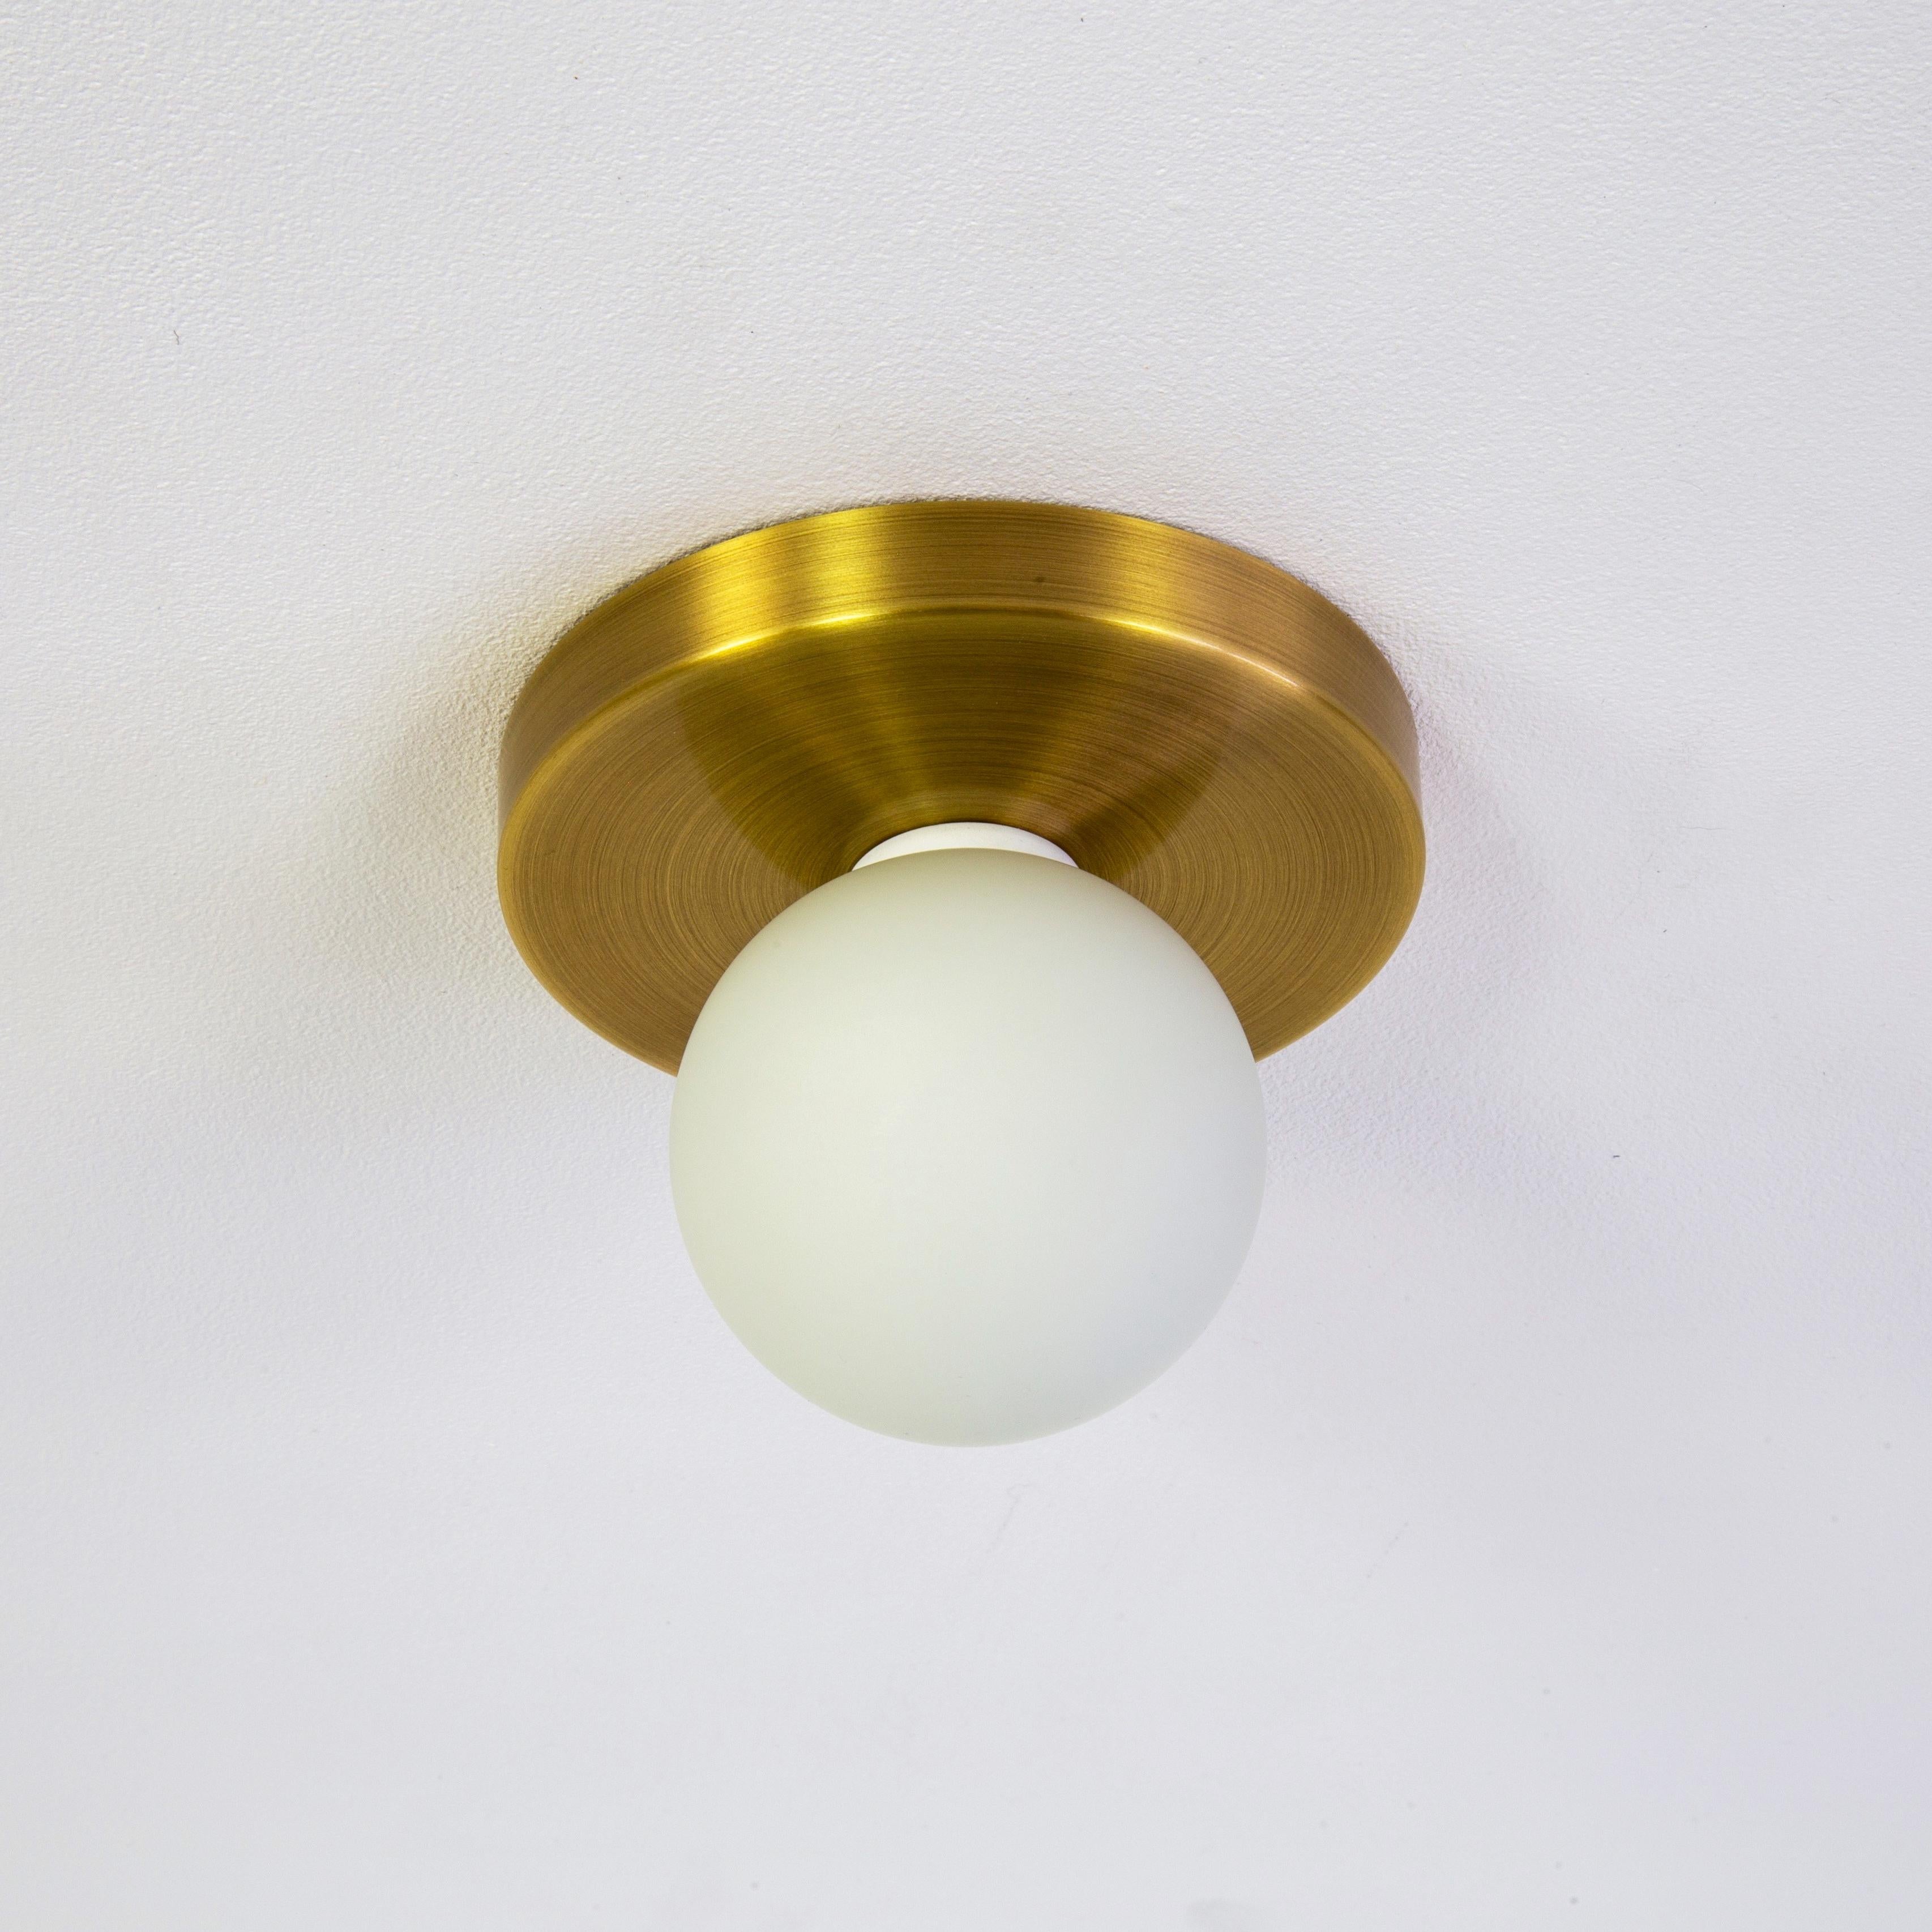 This listing is for 2x Globe Flush Mounts in brushed brass designed and manufactured by Research.Lighting.

Materials: Brass, Steel & Glass
Finish: Brushed Brass
Electronics: 1x G9 Socket, 1x 4.5 Watt LED Bulb (included), 450 Lumens
ADA Compliant.